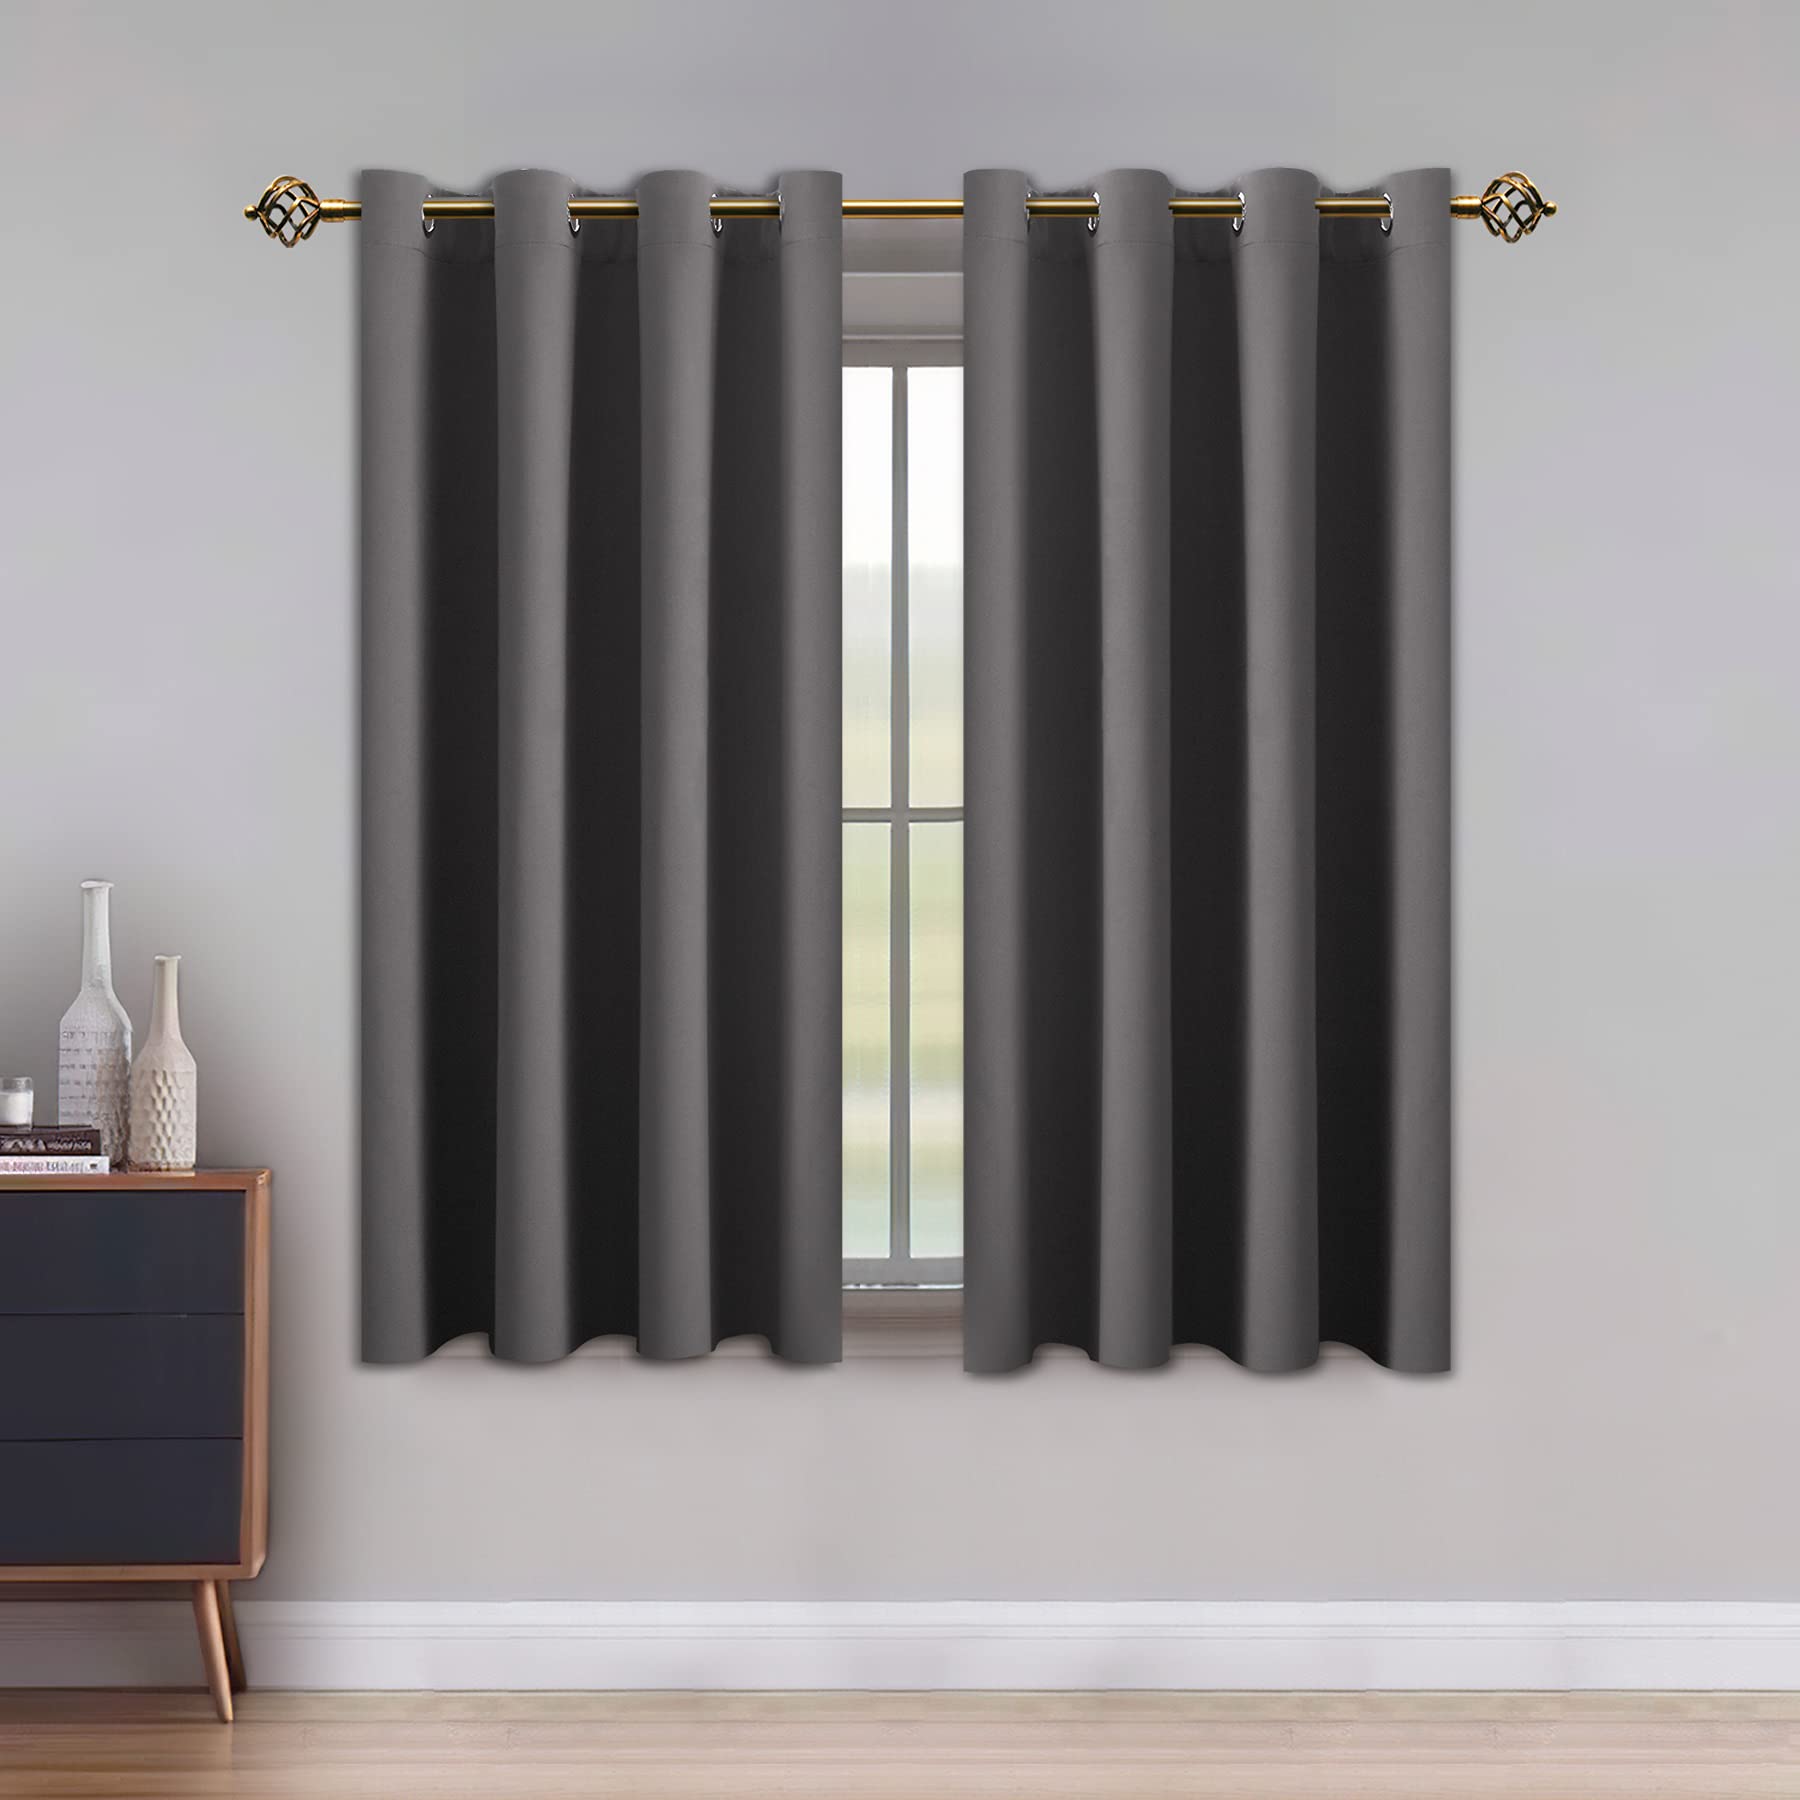 2-Panels 52"x63" Lushleaf Blackout Thermal Insulated Window Curtains w/ Grommets (grey) $10 + free shipping w/ Prime or on orders over $25